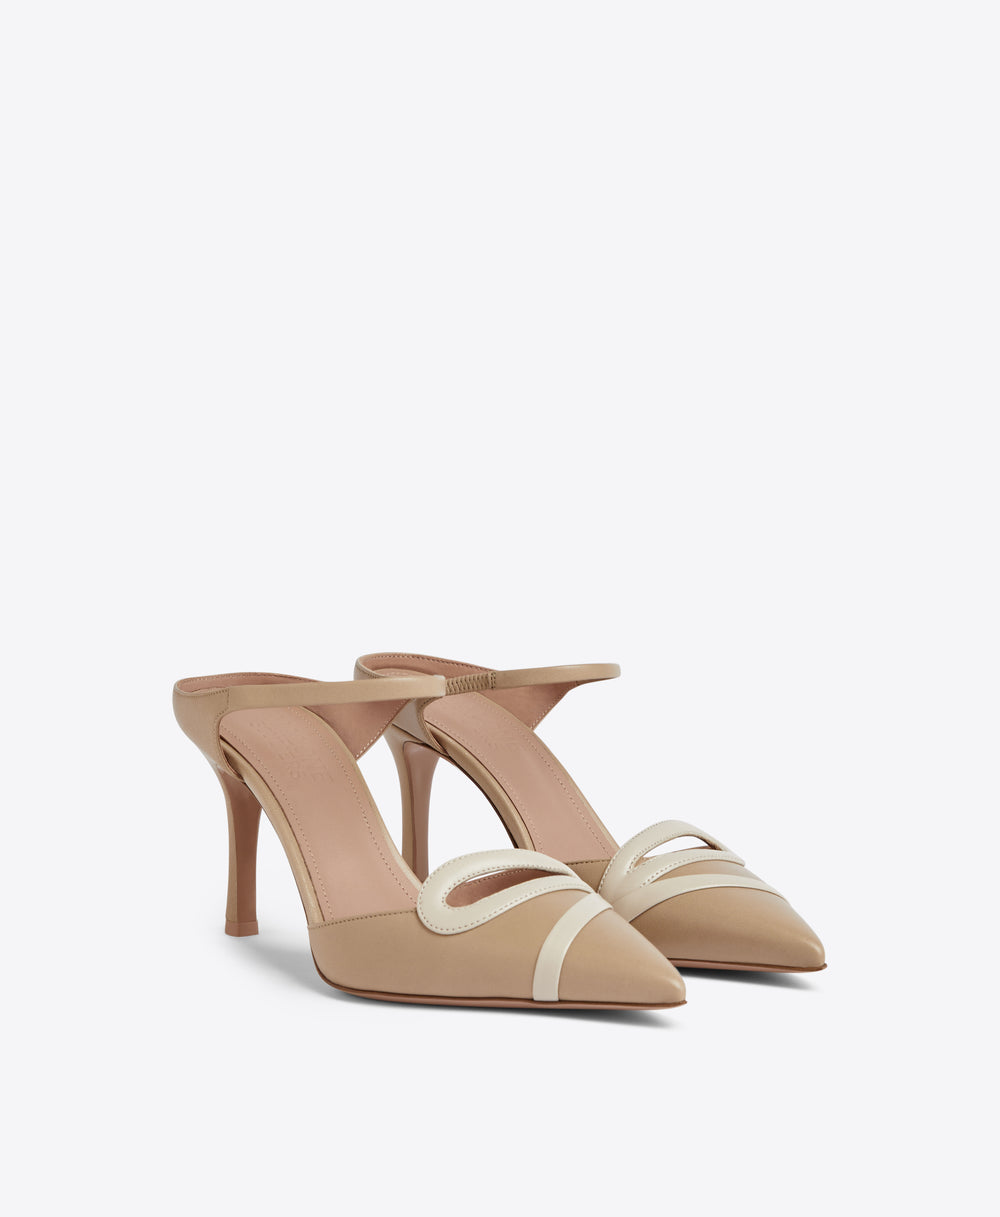 Malone Souliers Bonnie 80 Camel Leather Heeled Mules